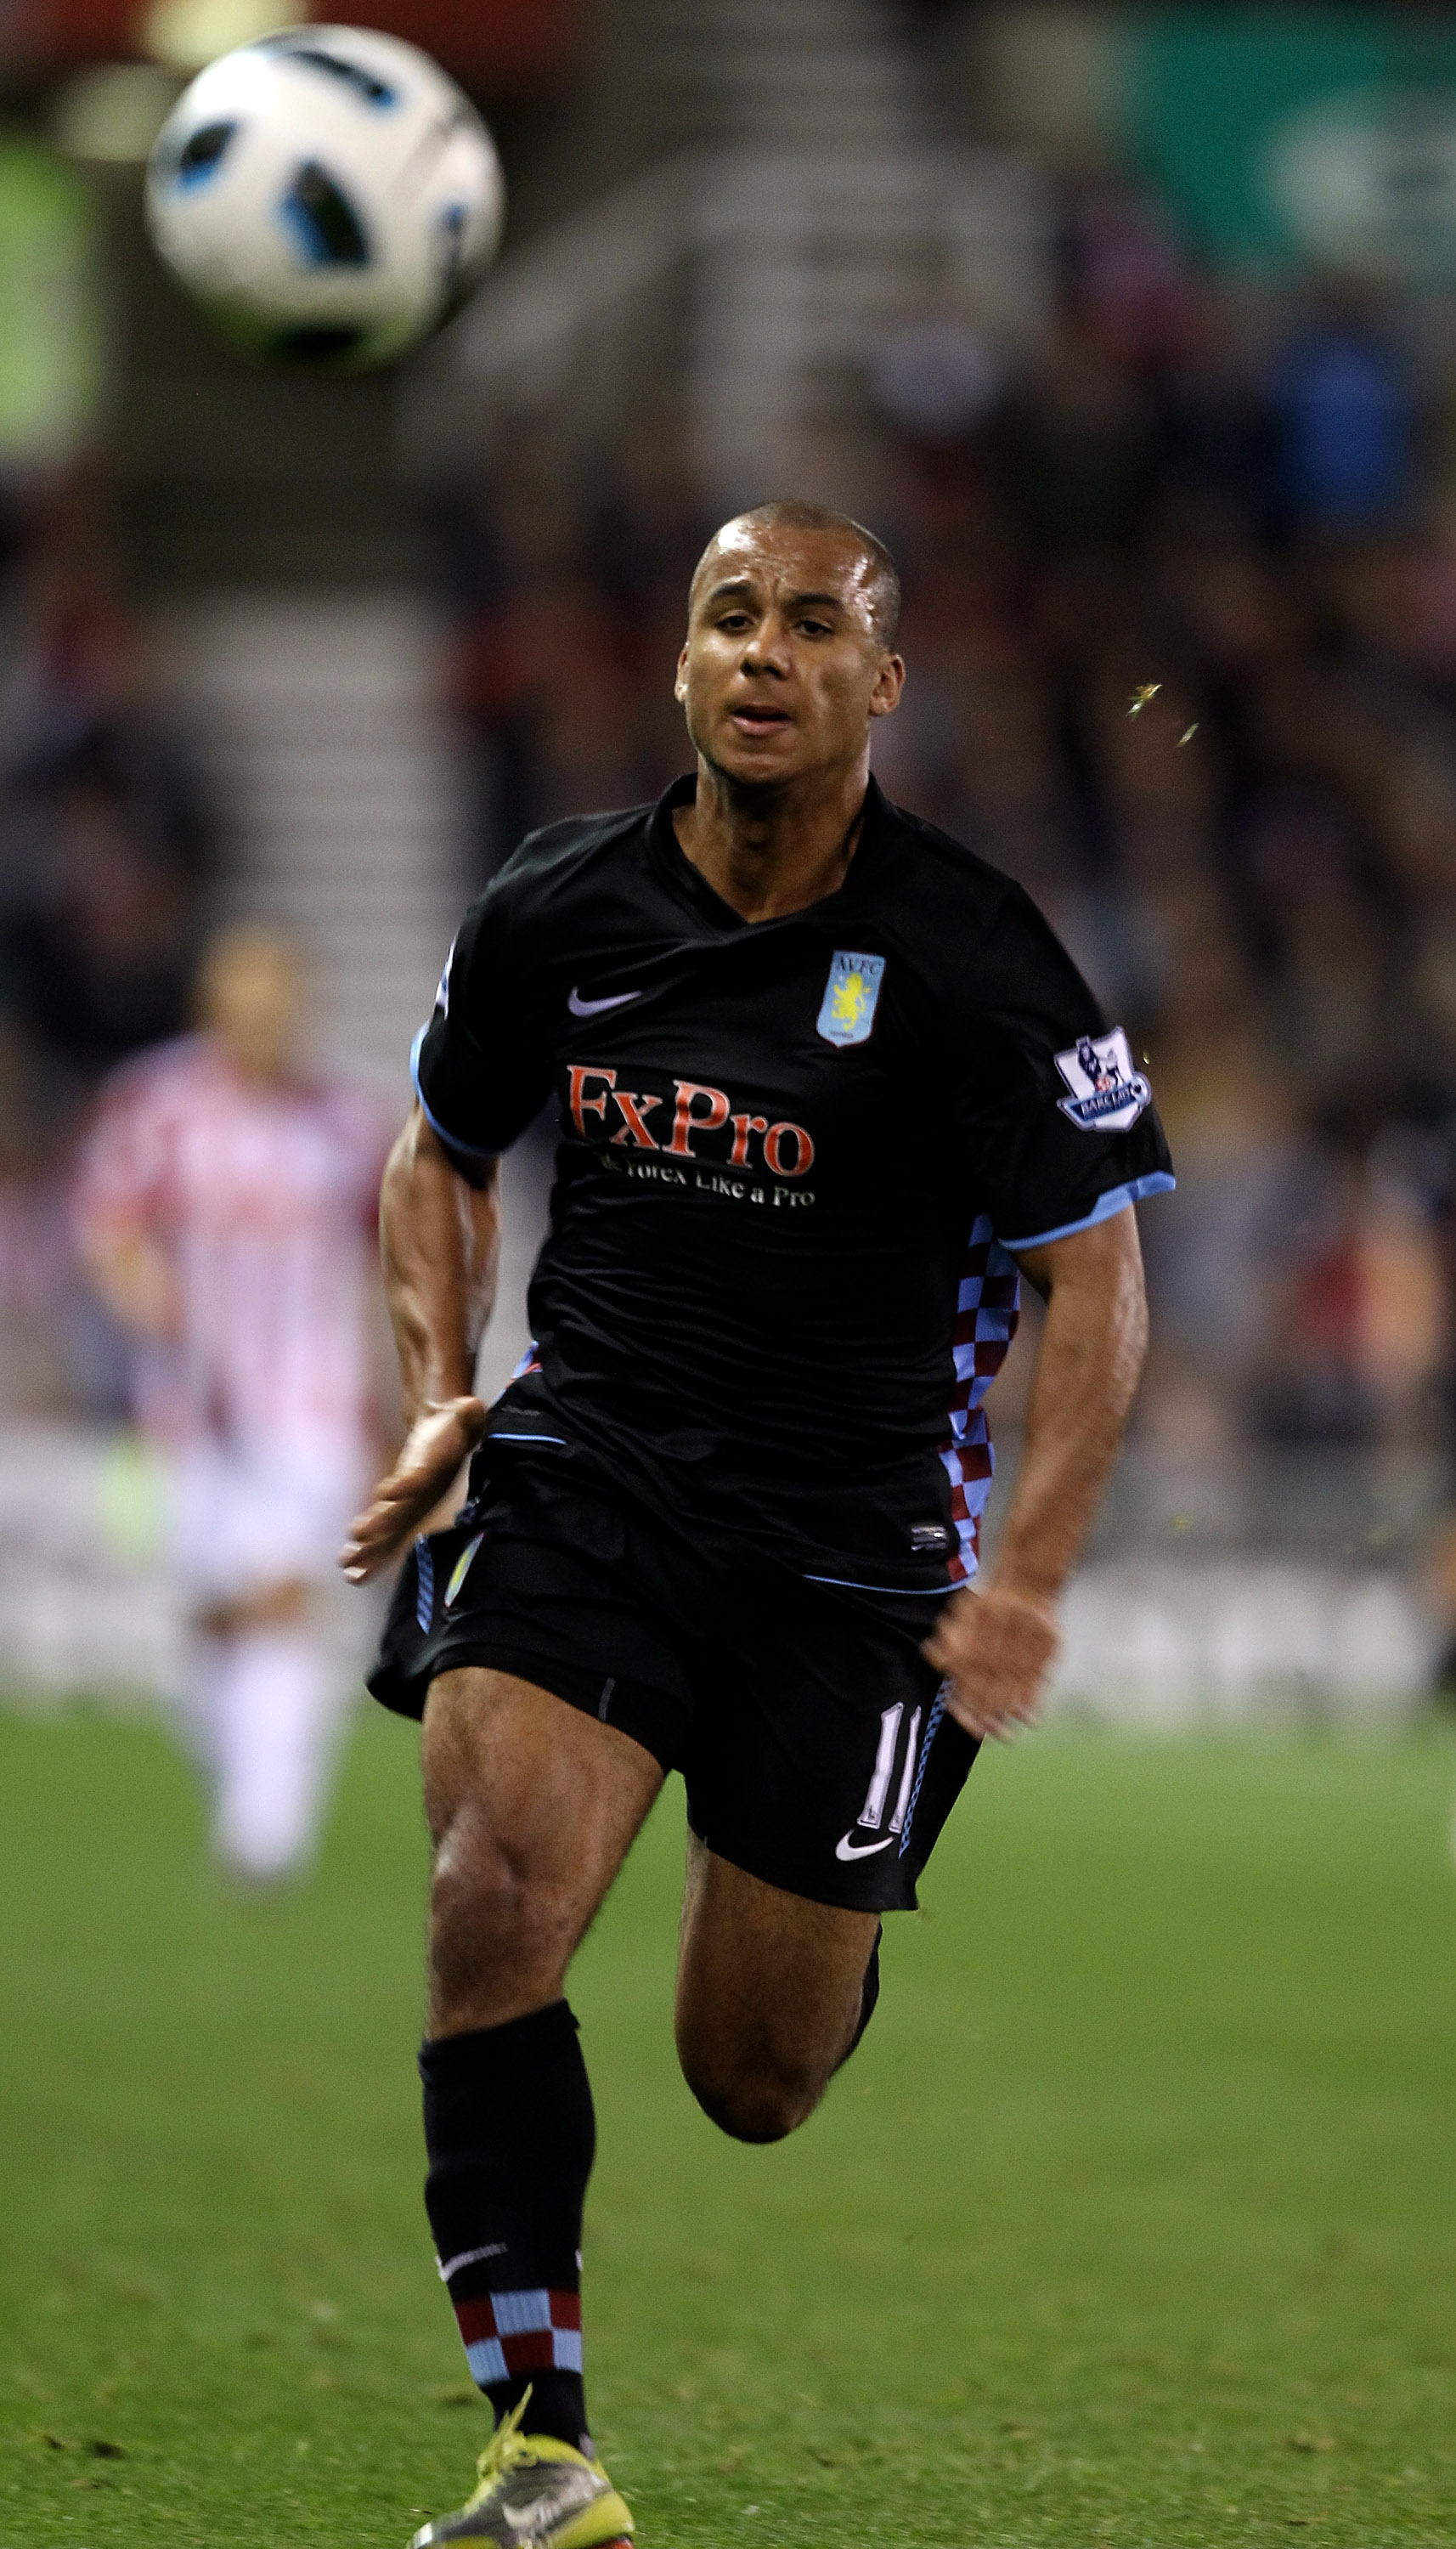 STOKE ON TRENT, ENGLAND - SEPTEMBER 13:   Gabriel Agbonlahor of Aston Villa in action during the Barclays Premier League match between Stoke City and Aston Villa at The Britannia Stadium on September 13, 2010 in Stoke on Trent, England. (Photo by Ross Kin